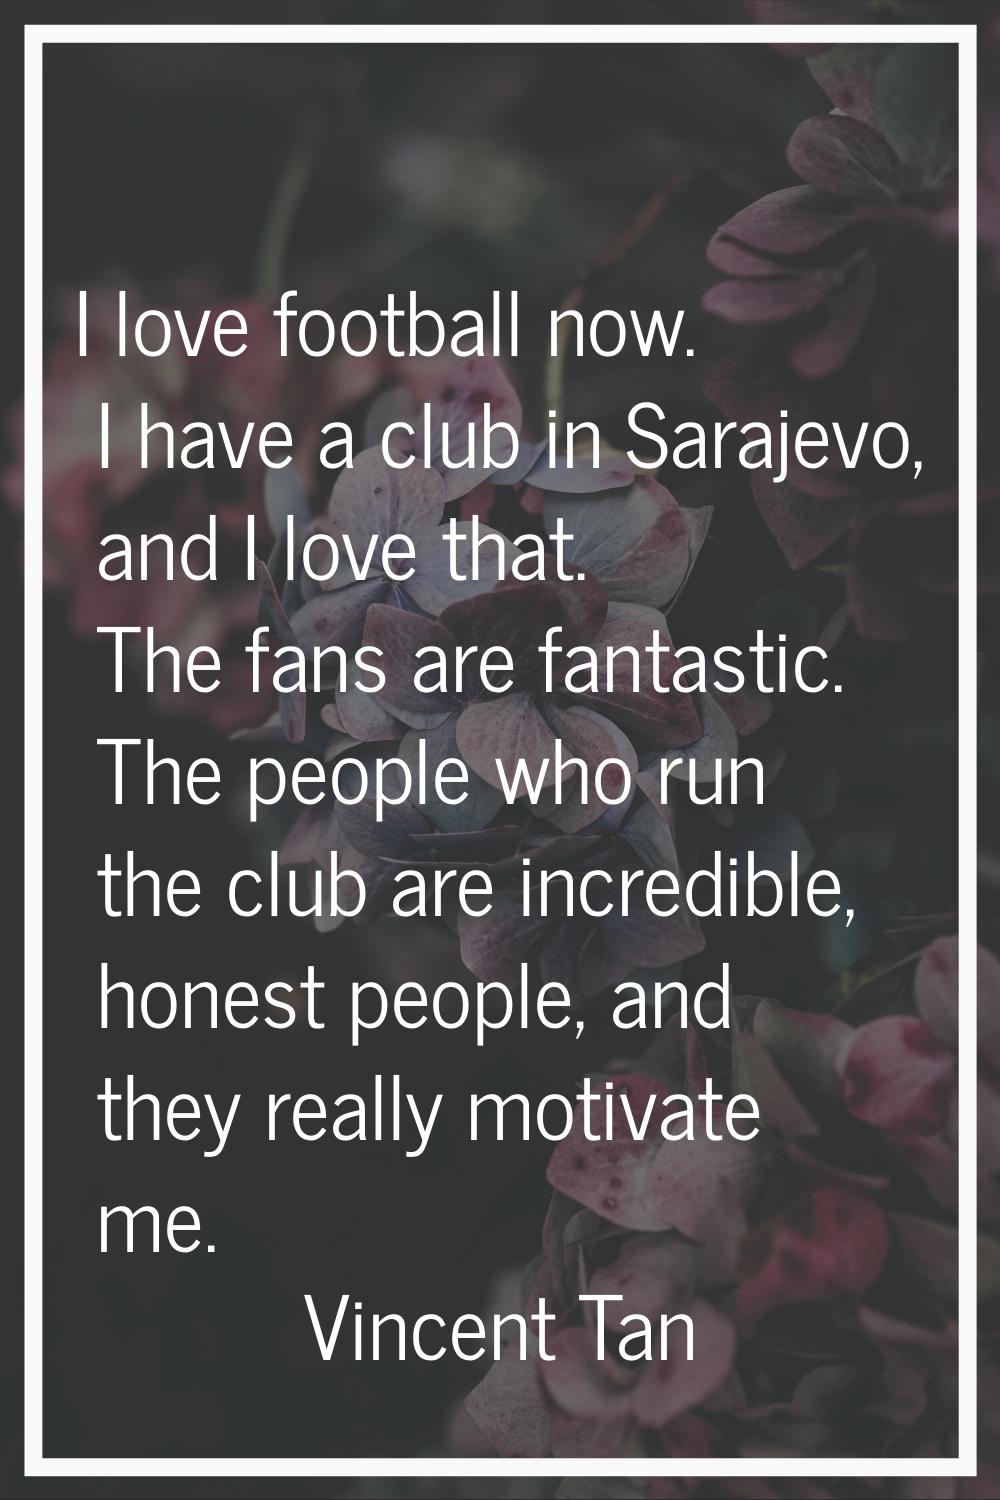 I love football now. I have a club in Sarajevo, and I love that. The fans are fantastic. The people